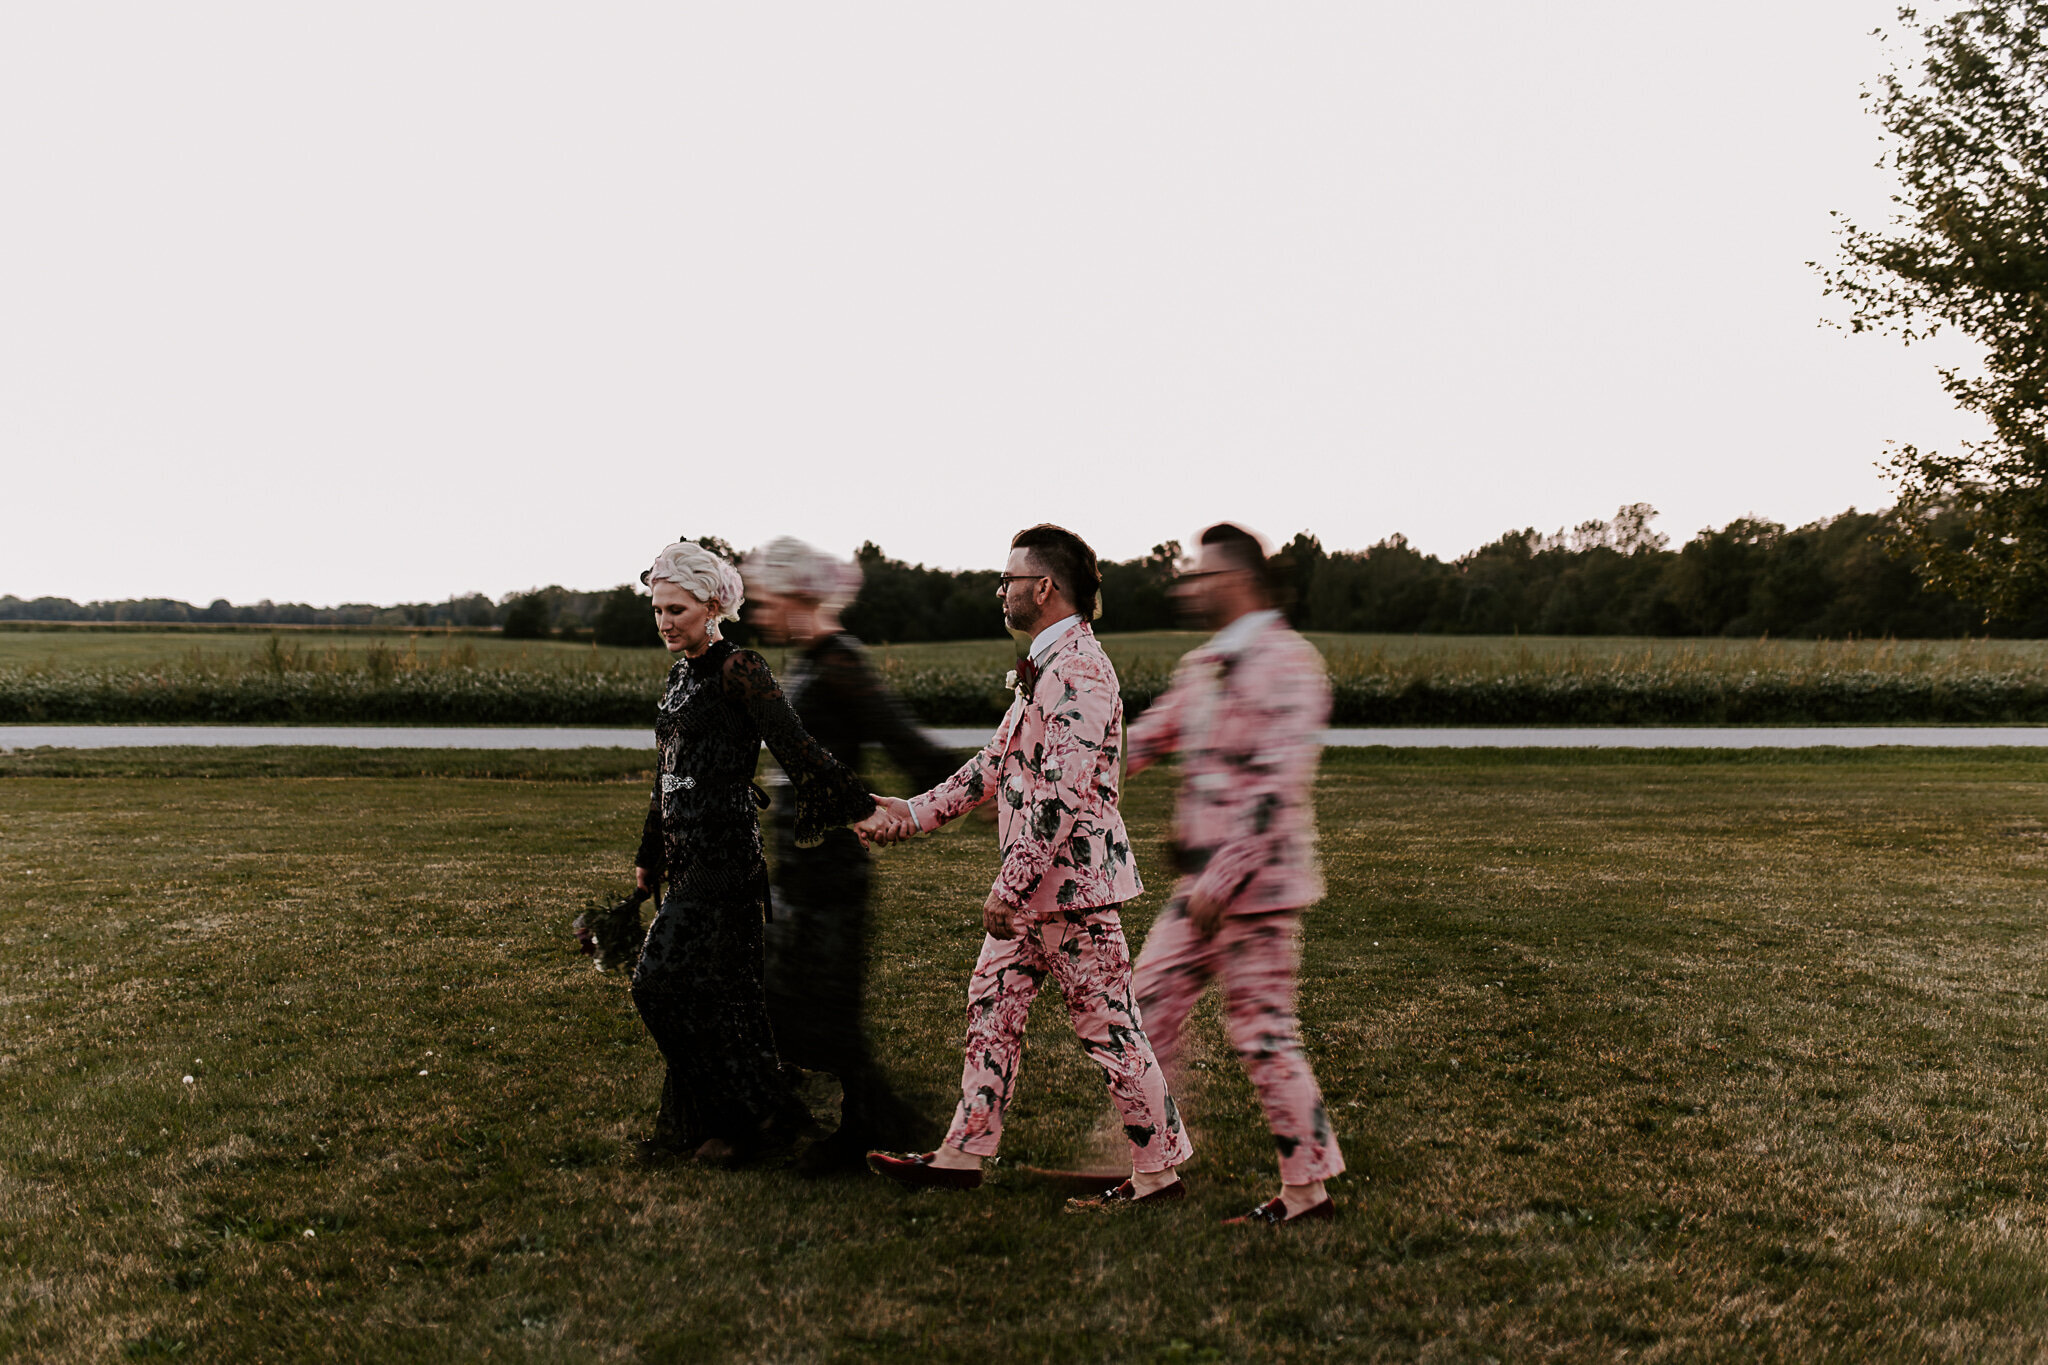 A bride and groom in a floral suit with tattooswalk across a field at sunset